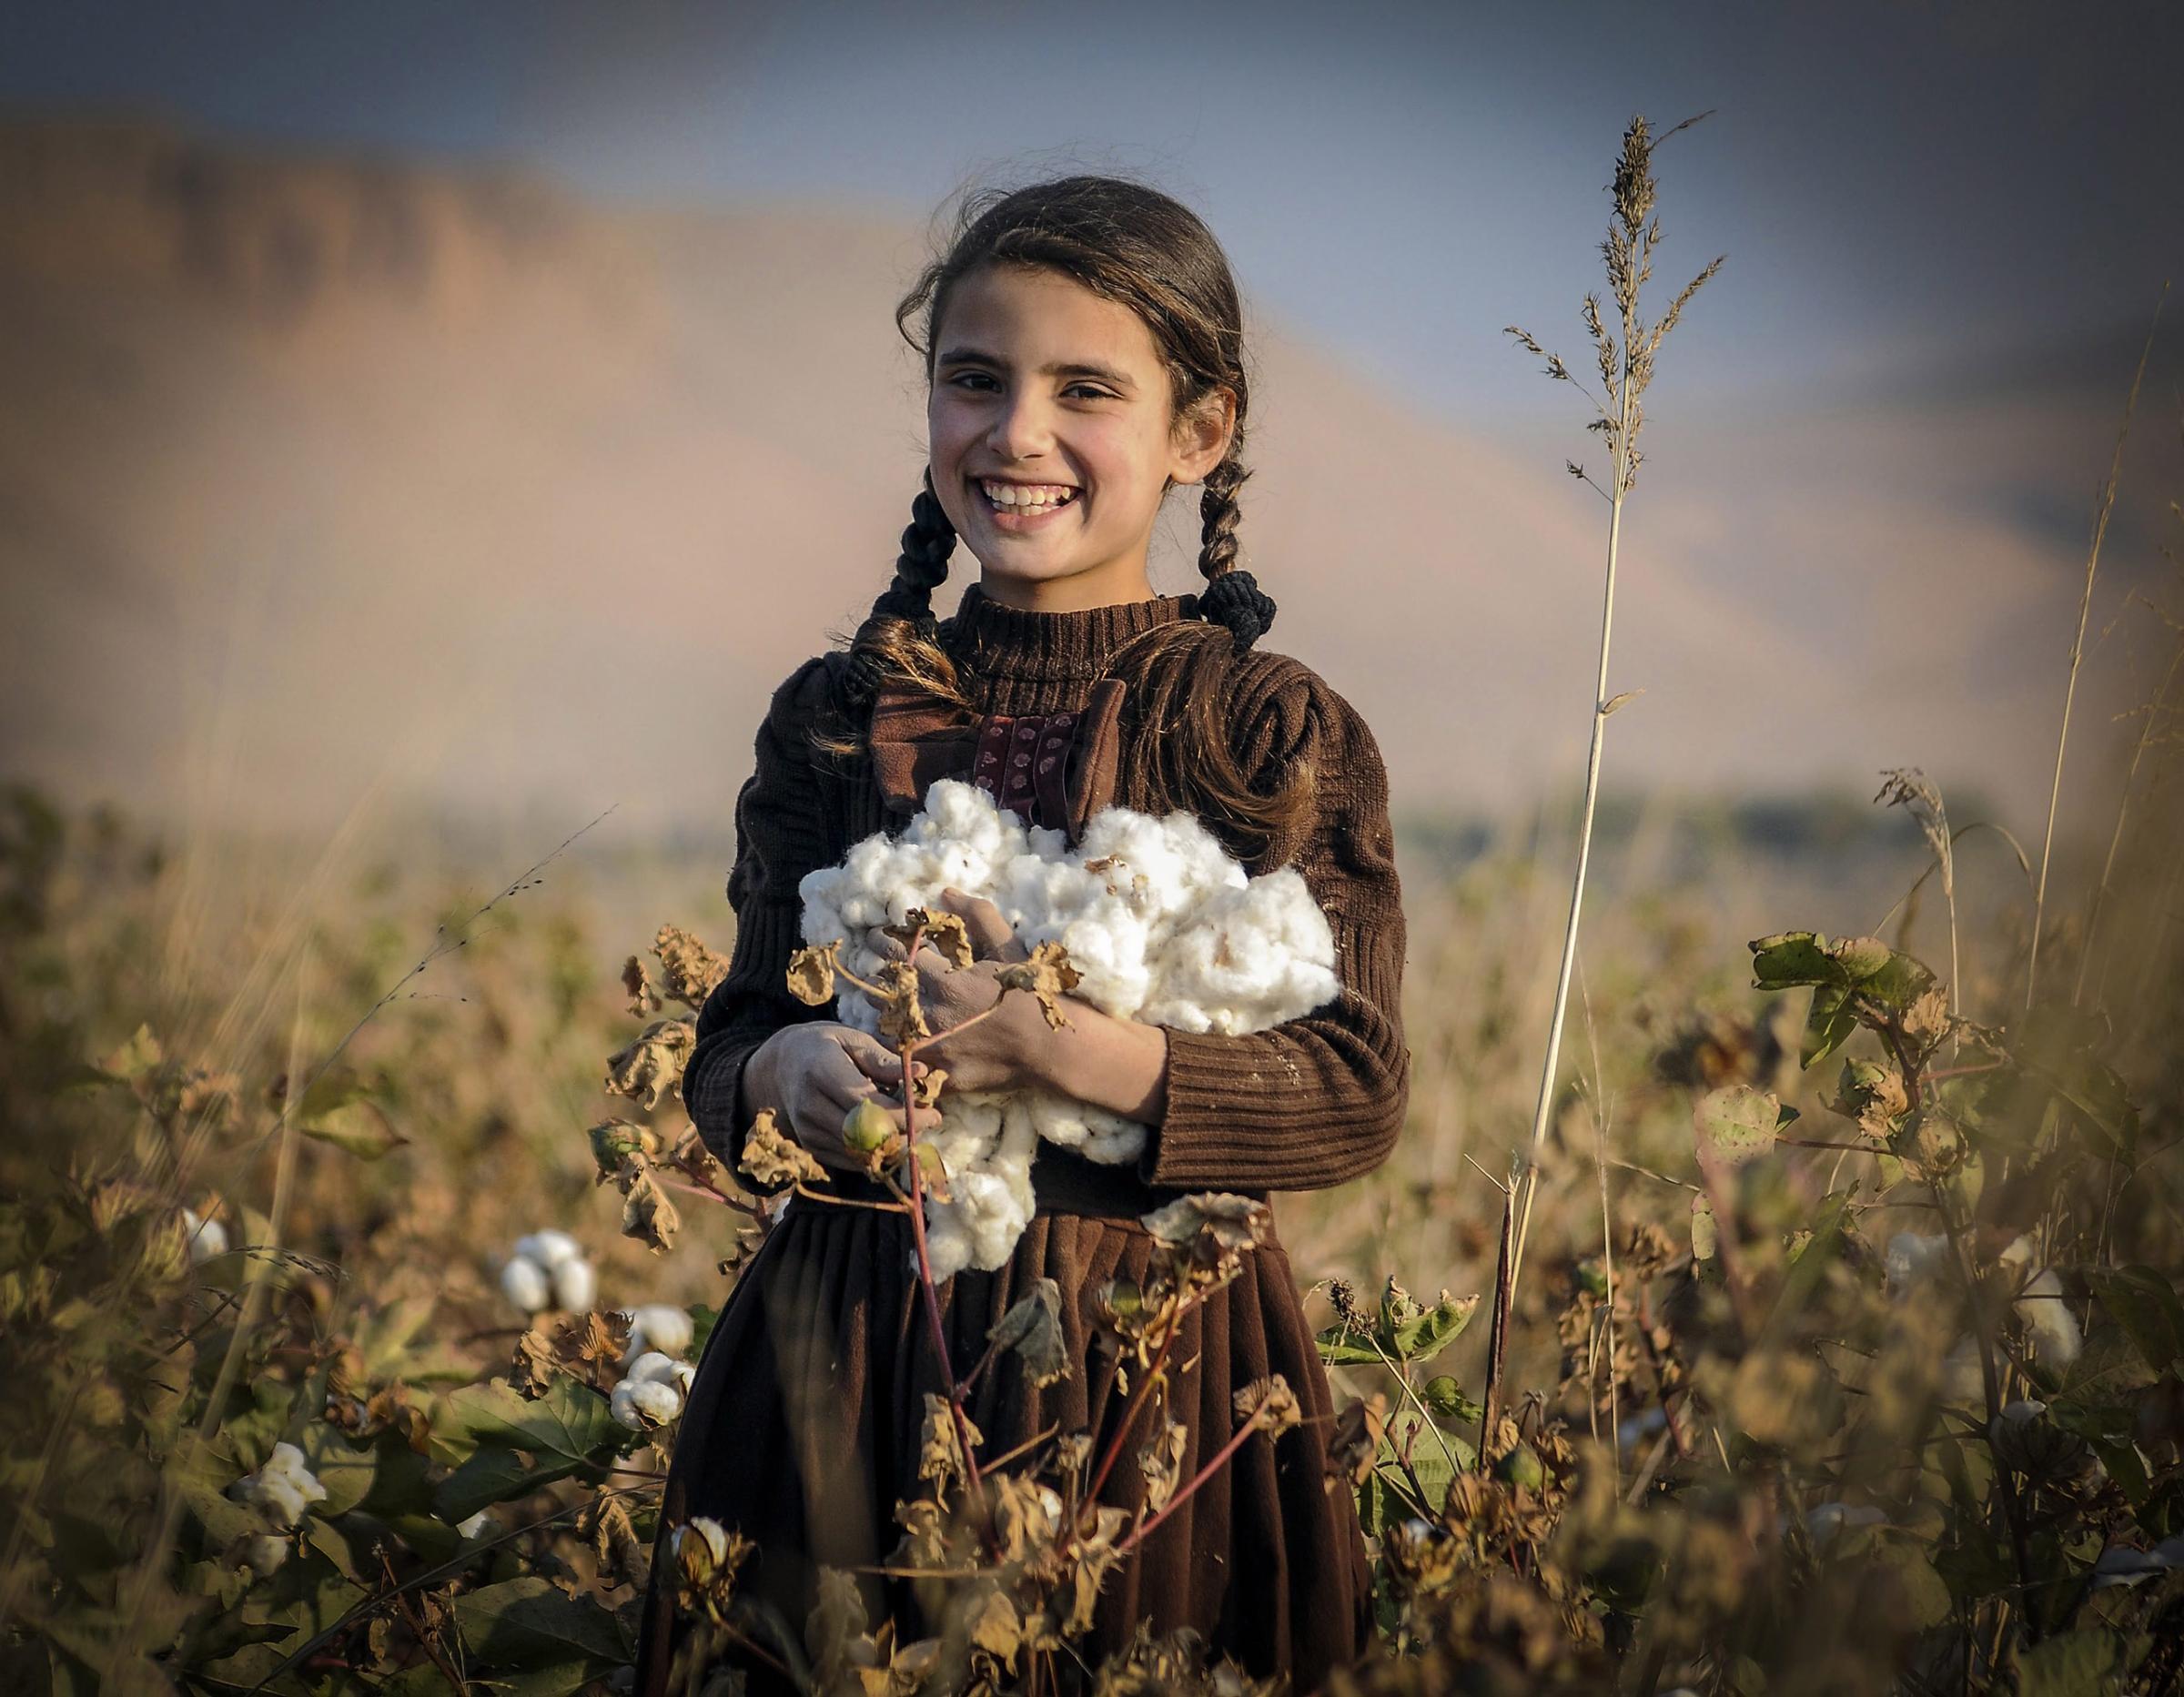 An Afghan girl harvests Cotton buds at a field on the outskirts of Balkh province, Afghanistan on Nov. 15, 2014.